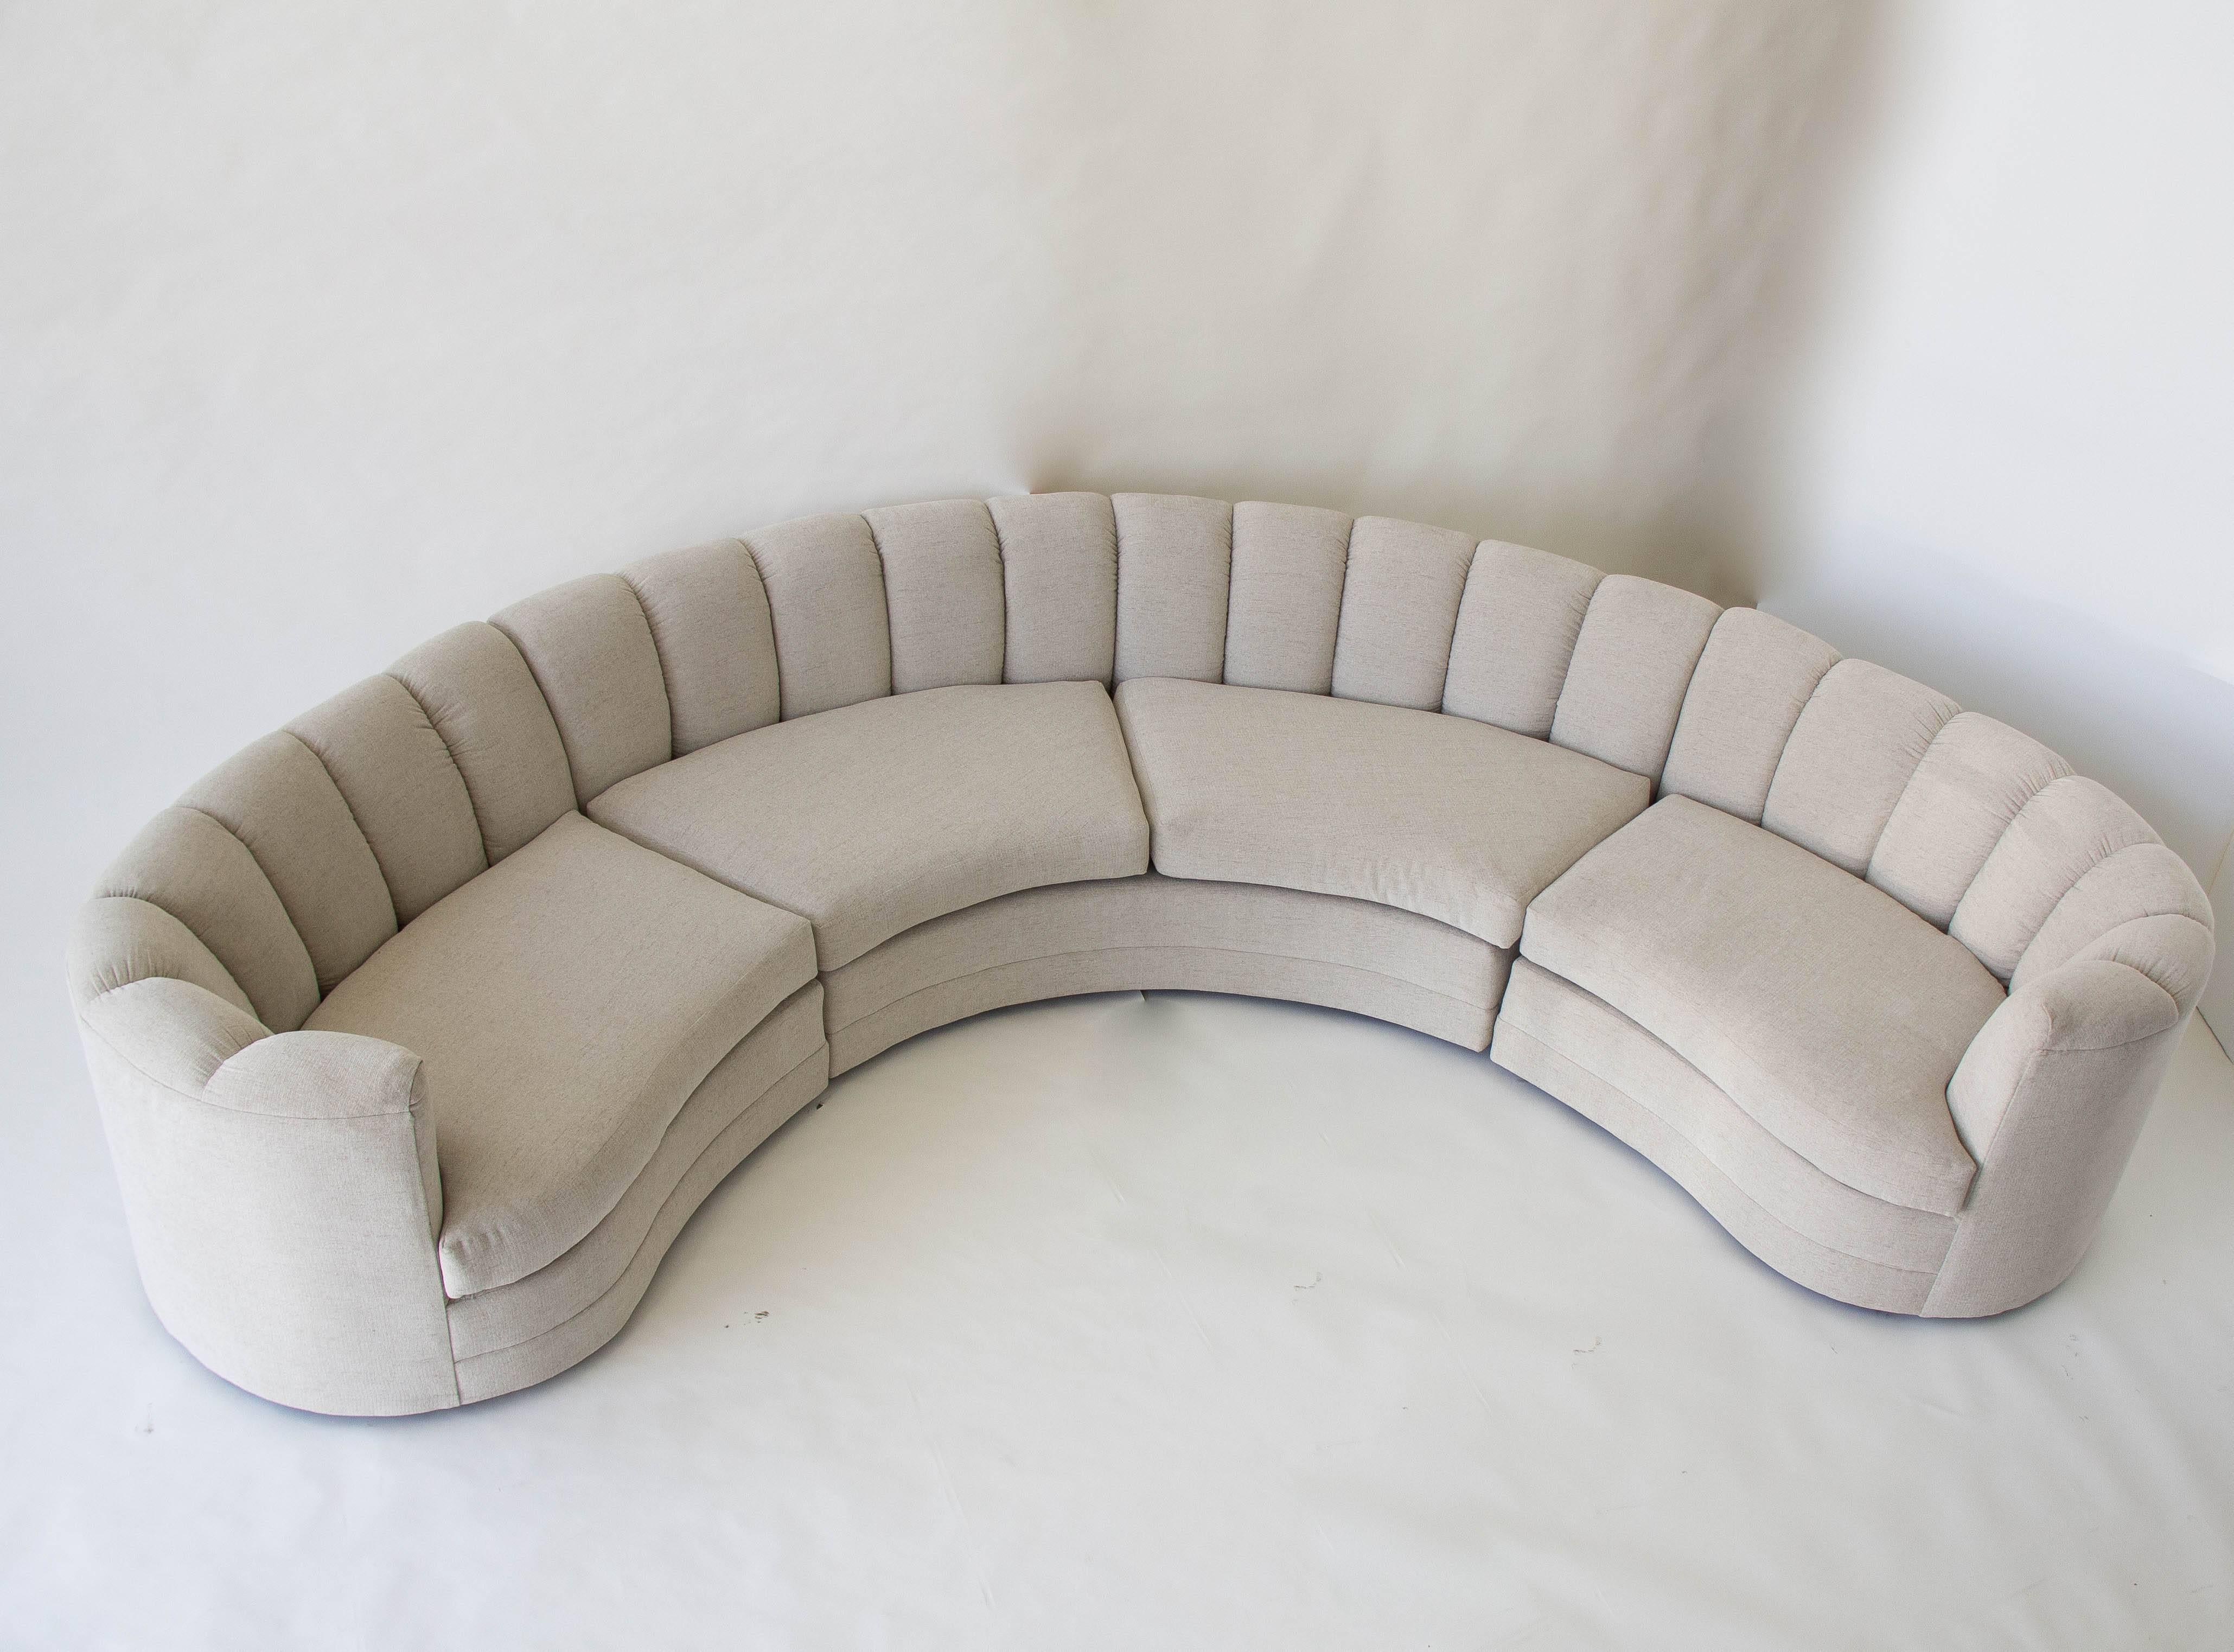 Custom-designed semicircular sofa from the late 1980s. This sectional sofa is composed of three pieces, one curved central unit and two ends, all of which have a scalloped shell back and ‘float’ on recessed wooden feet. Designed and manufactured in